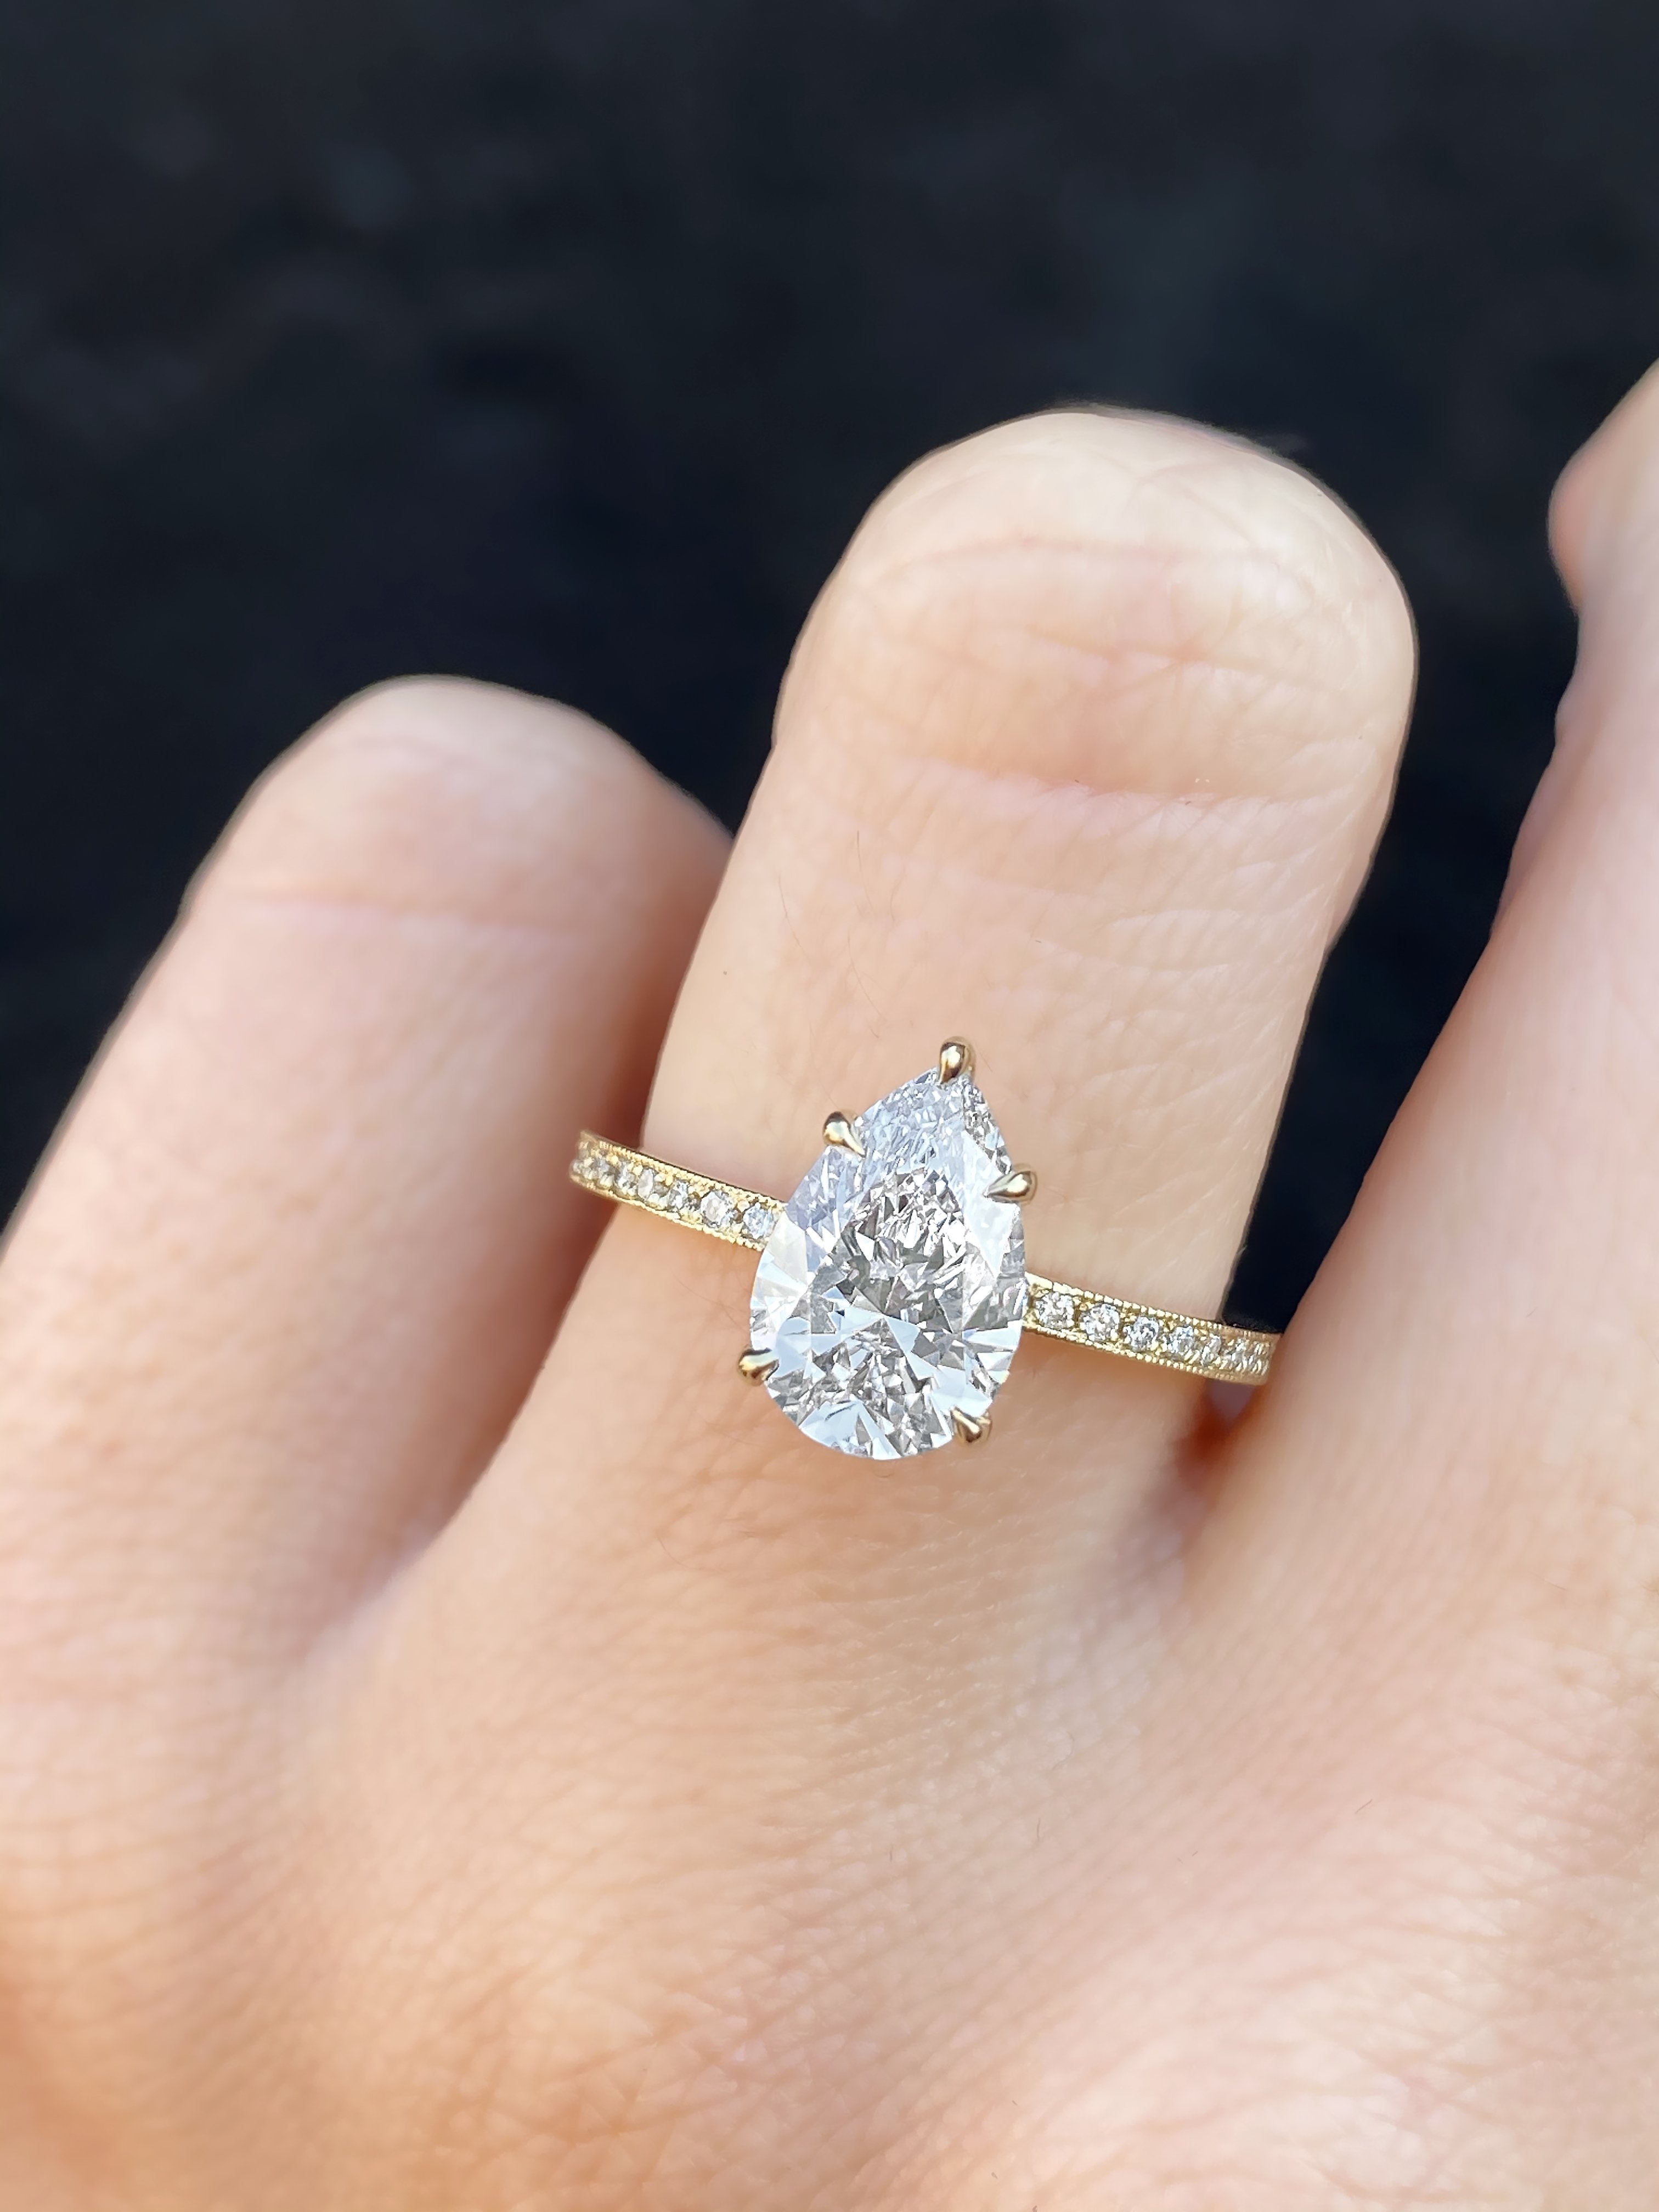 How to Sell a Diamond Ring to a Pawn Shop?